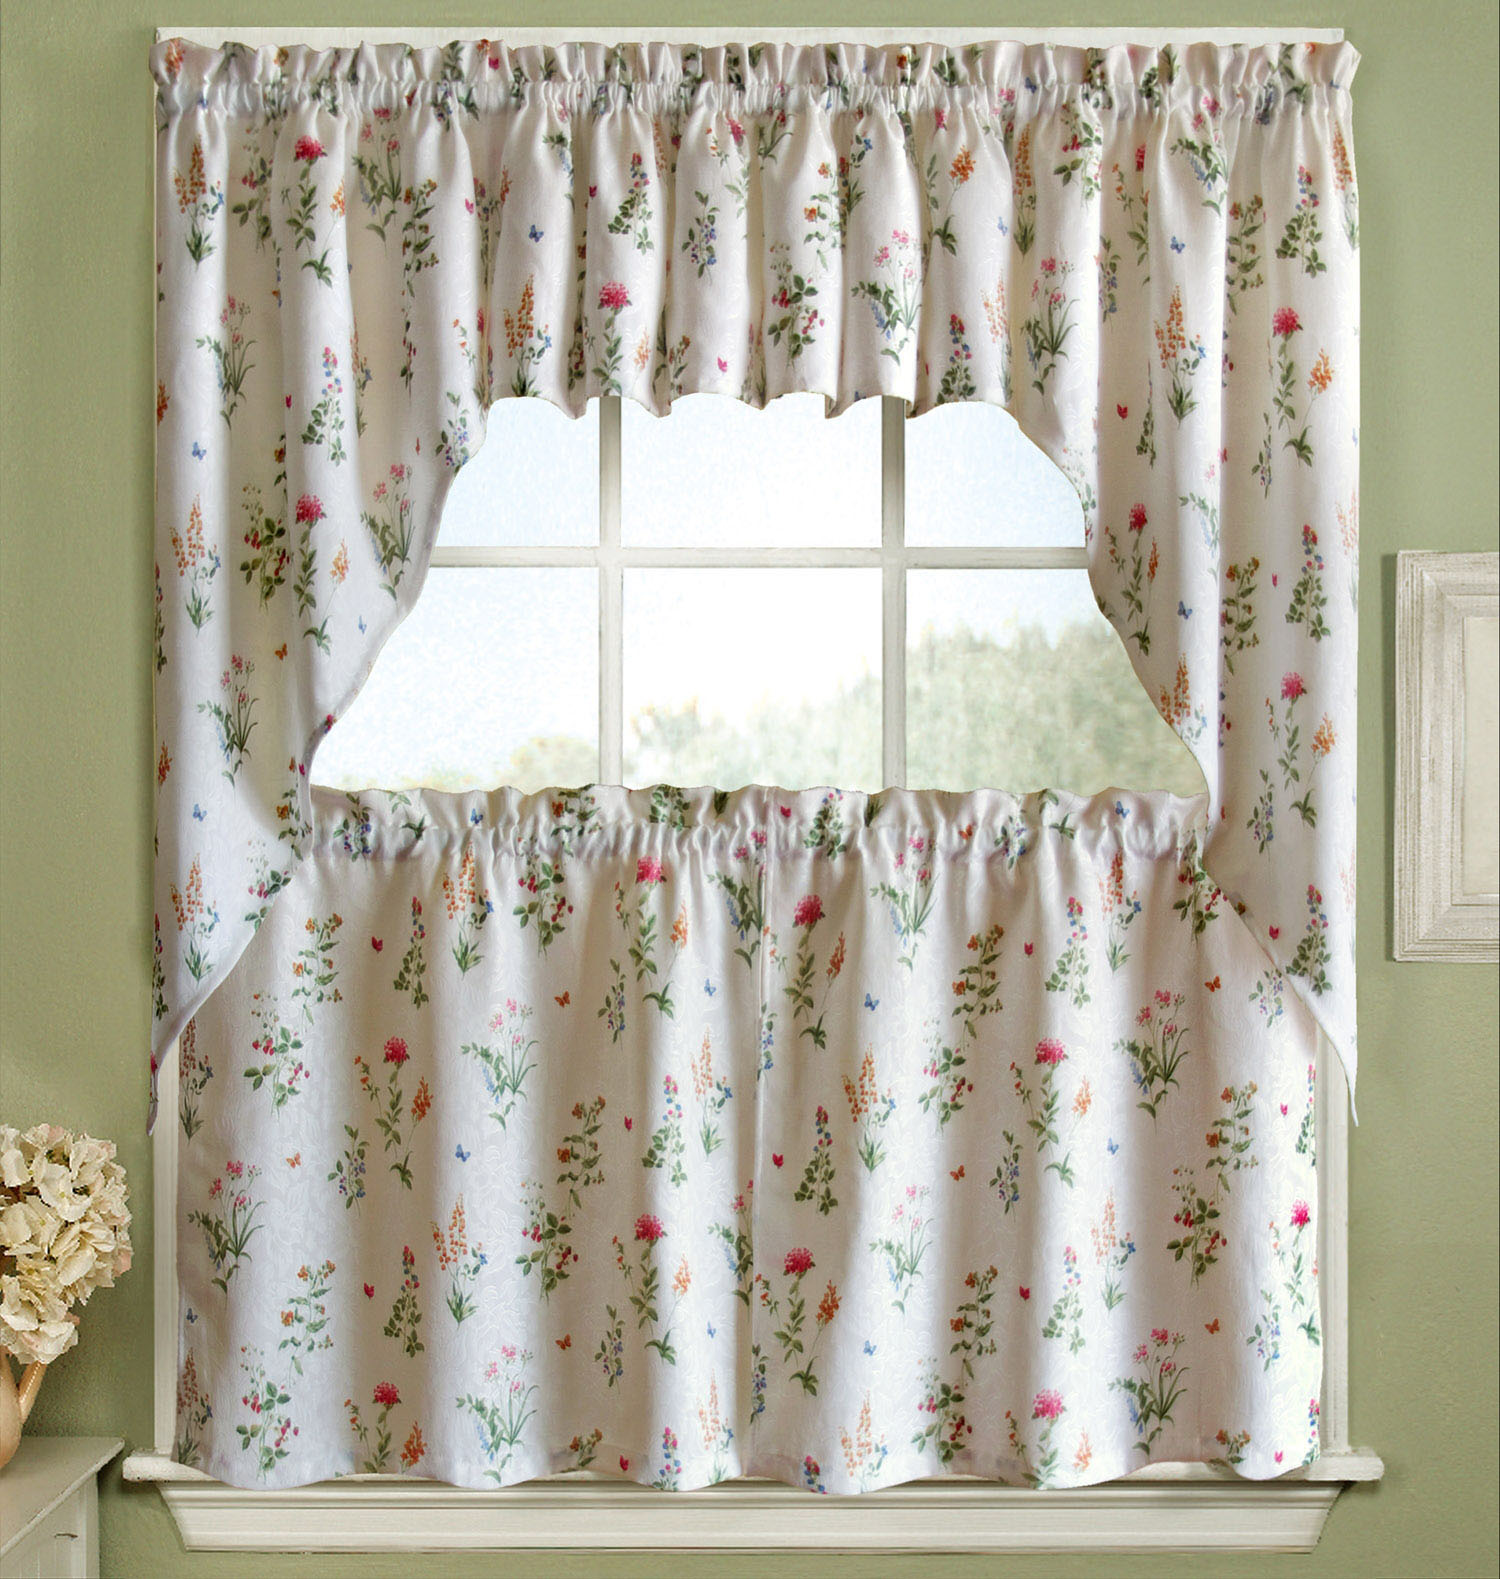 English Garden Floral White Jacquard Kitchen Curtains Tier Valance Or Swag Ebay